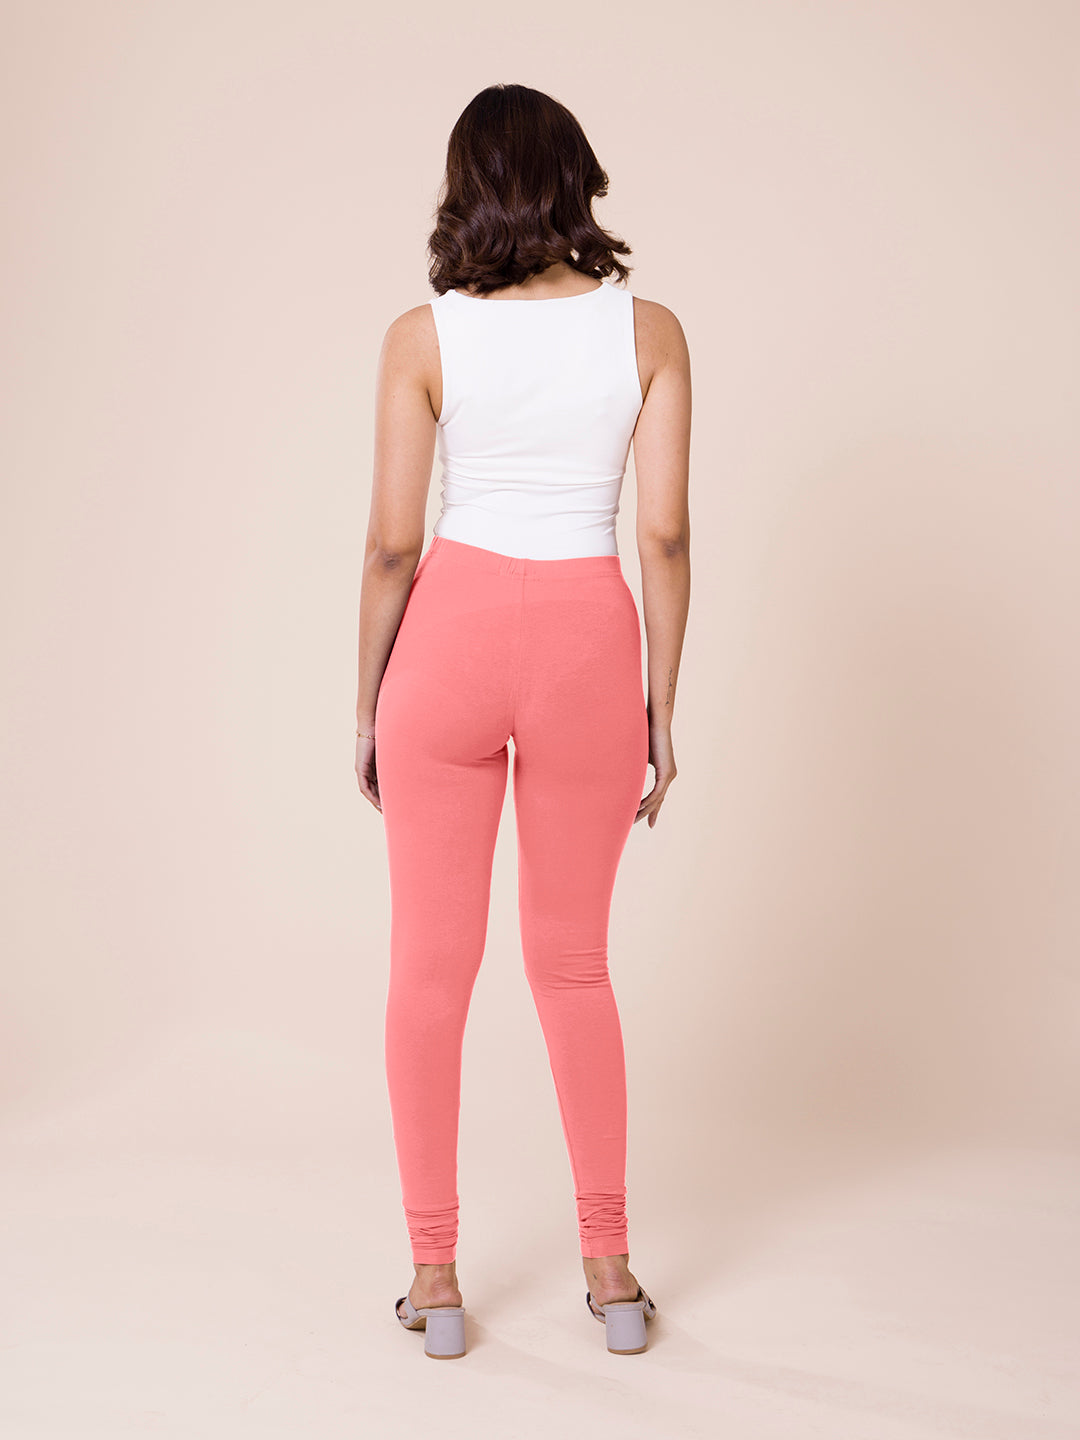 Prisma's Dusty Pink Churidar Leggings for Comfortable and Stylish Look